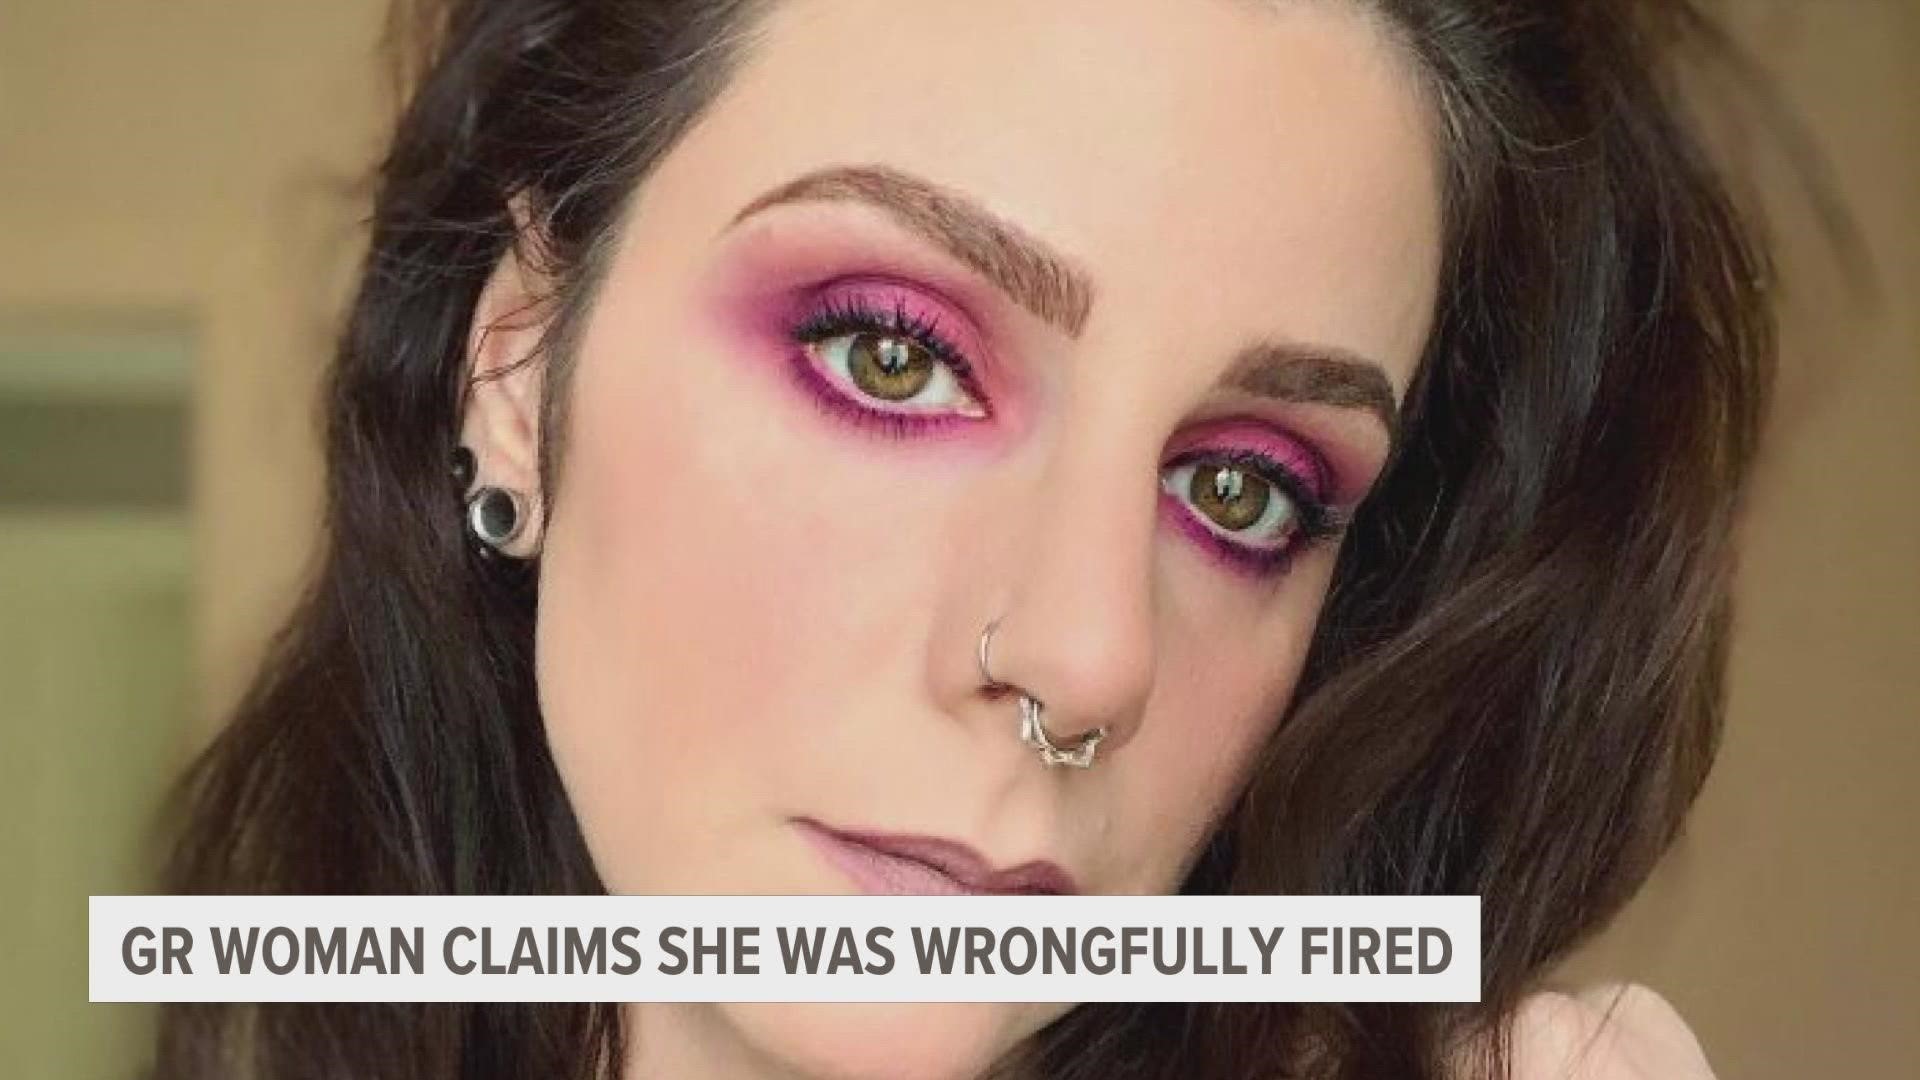 A Grand Rapids woman claims she was fired because of posts she made on social media. The company says this is not true.